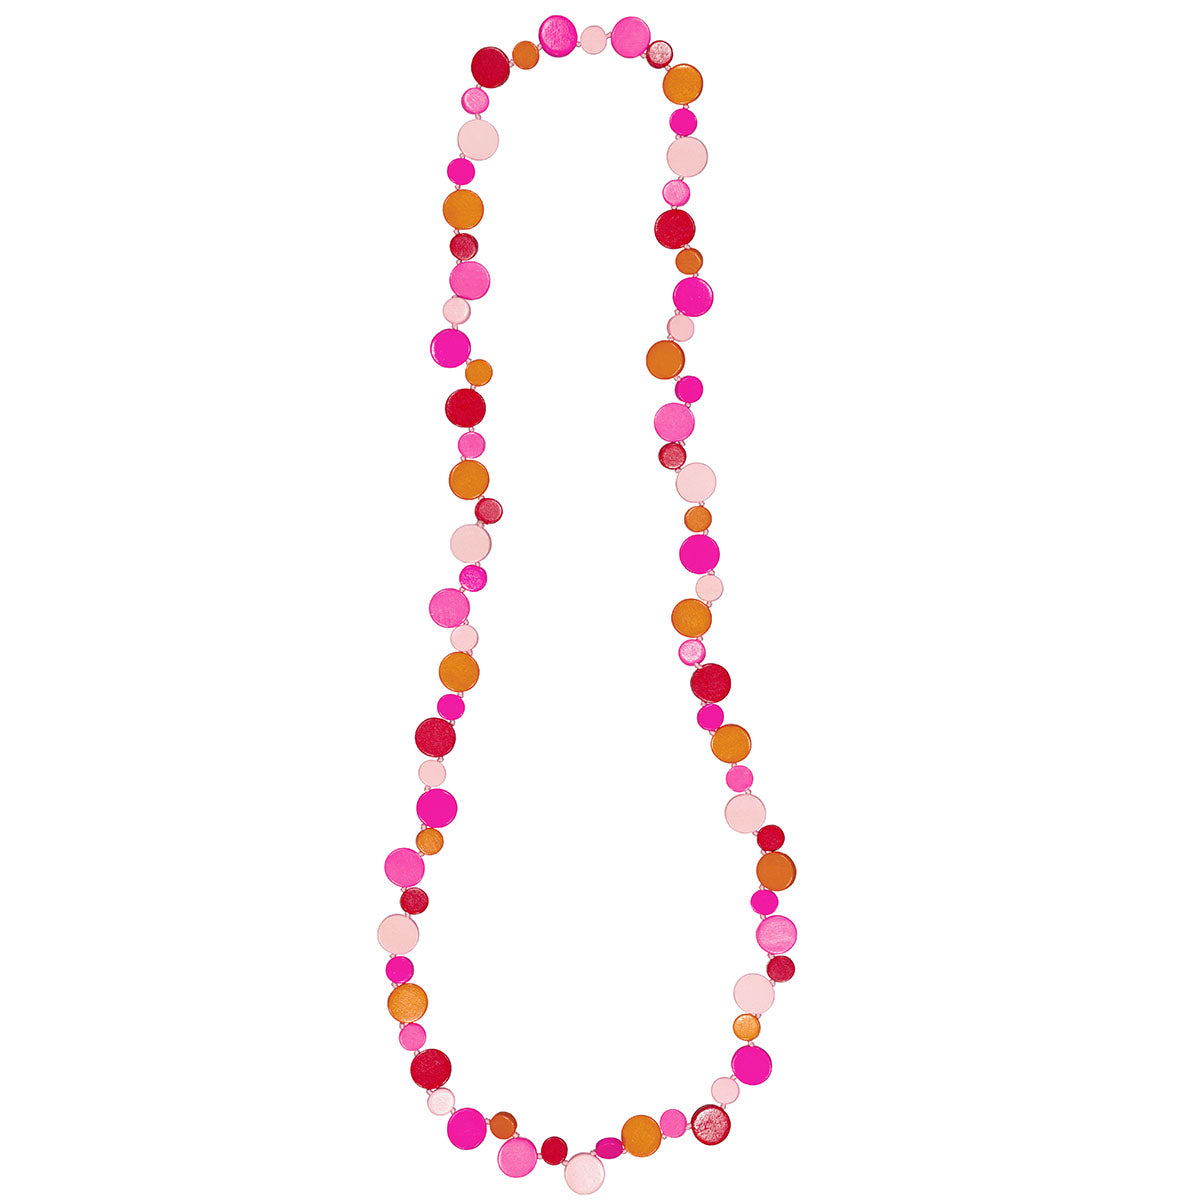 Smartie Single Strand Wood Necklace Pink